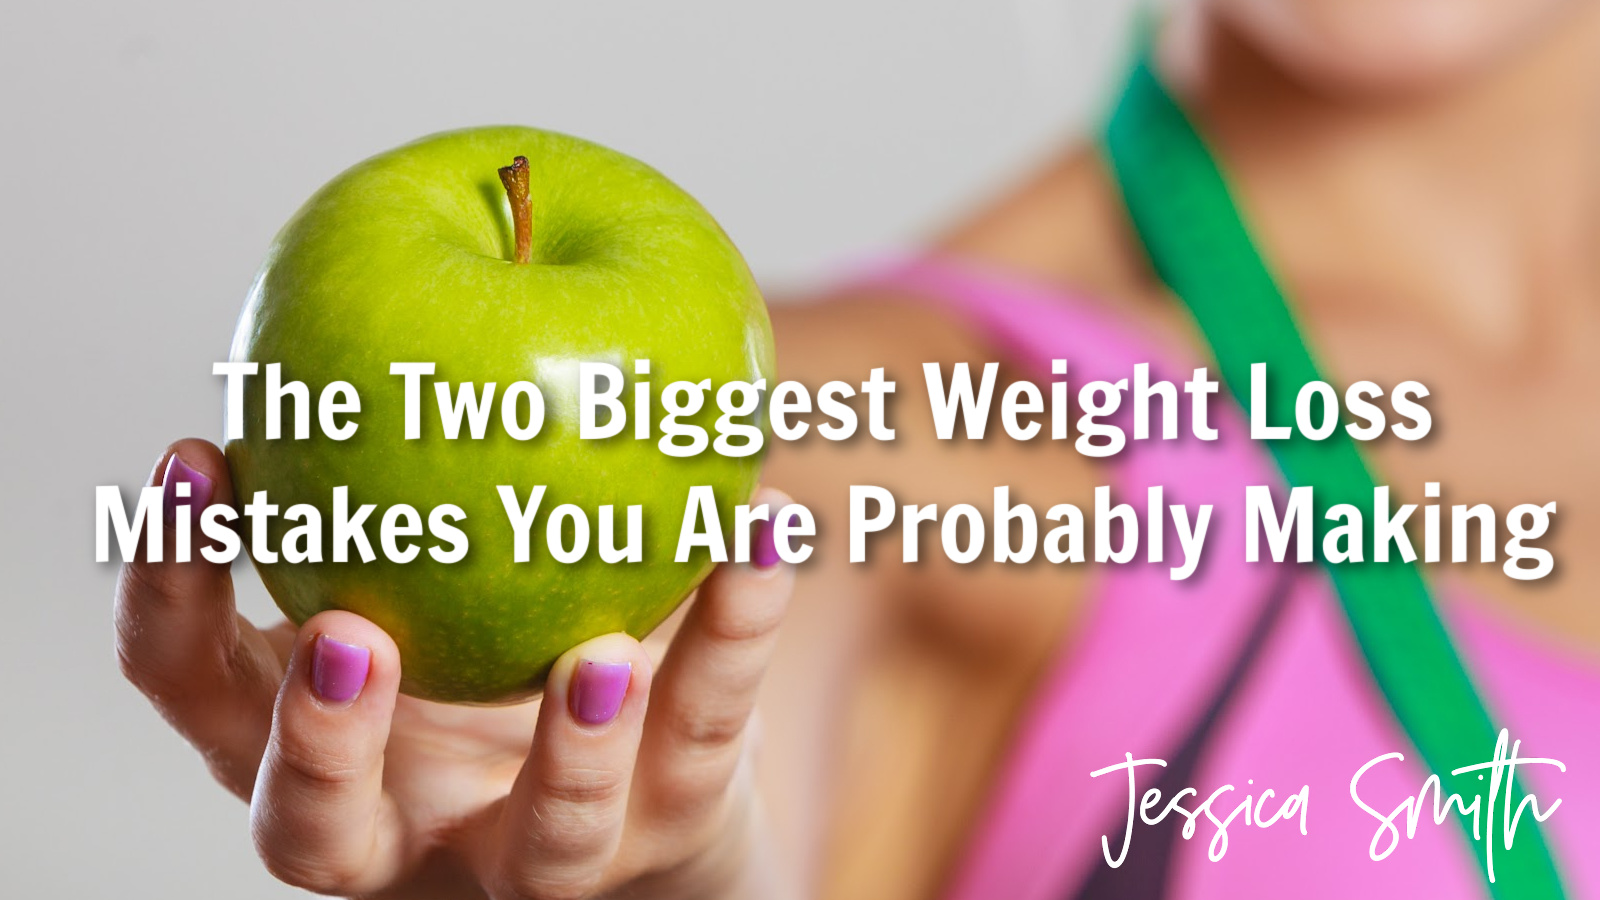 The Two Biggest Weight Loss Mistakes You Are Probably Making